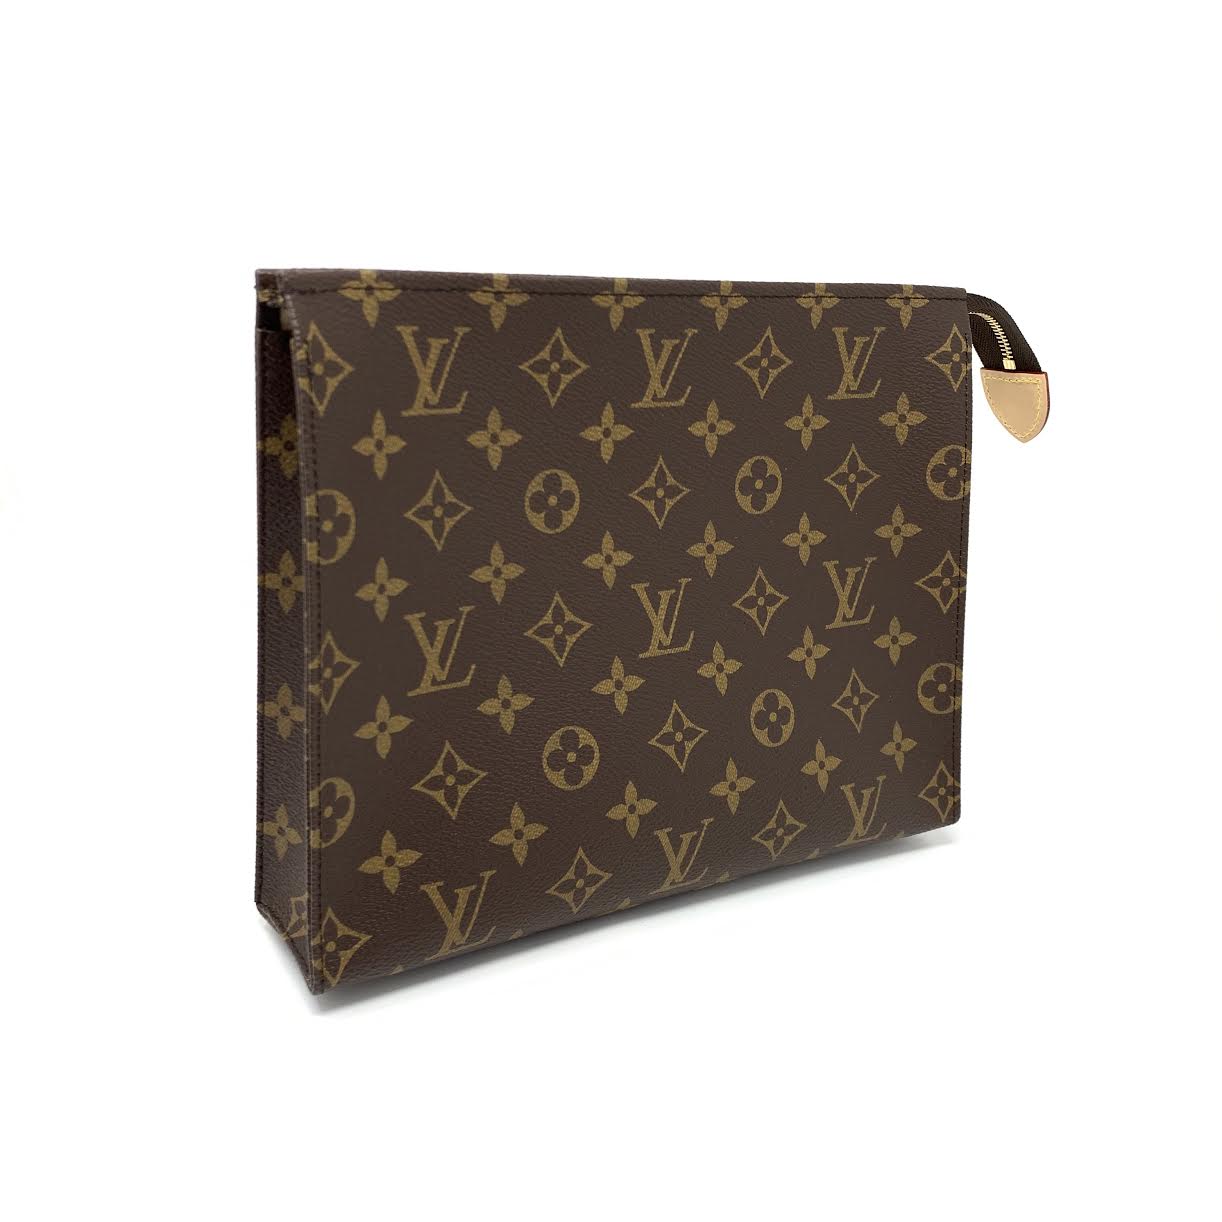 Sold at Auction: The LOUIS VUITTON Toiletry 26 Zip Pouch in Monogram.  Golden-tone zip closure with leather tab. Interior flat pocket. Come with a  dust bag and original box. W35cm X H20cm